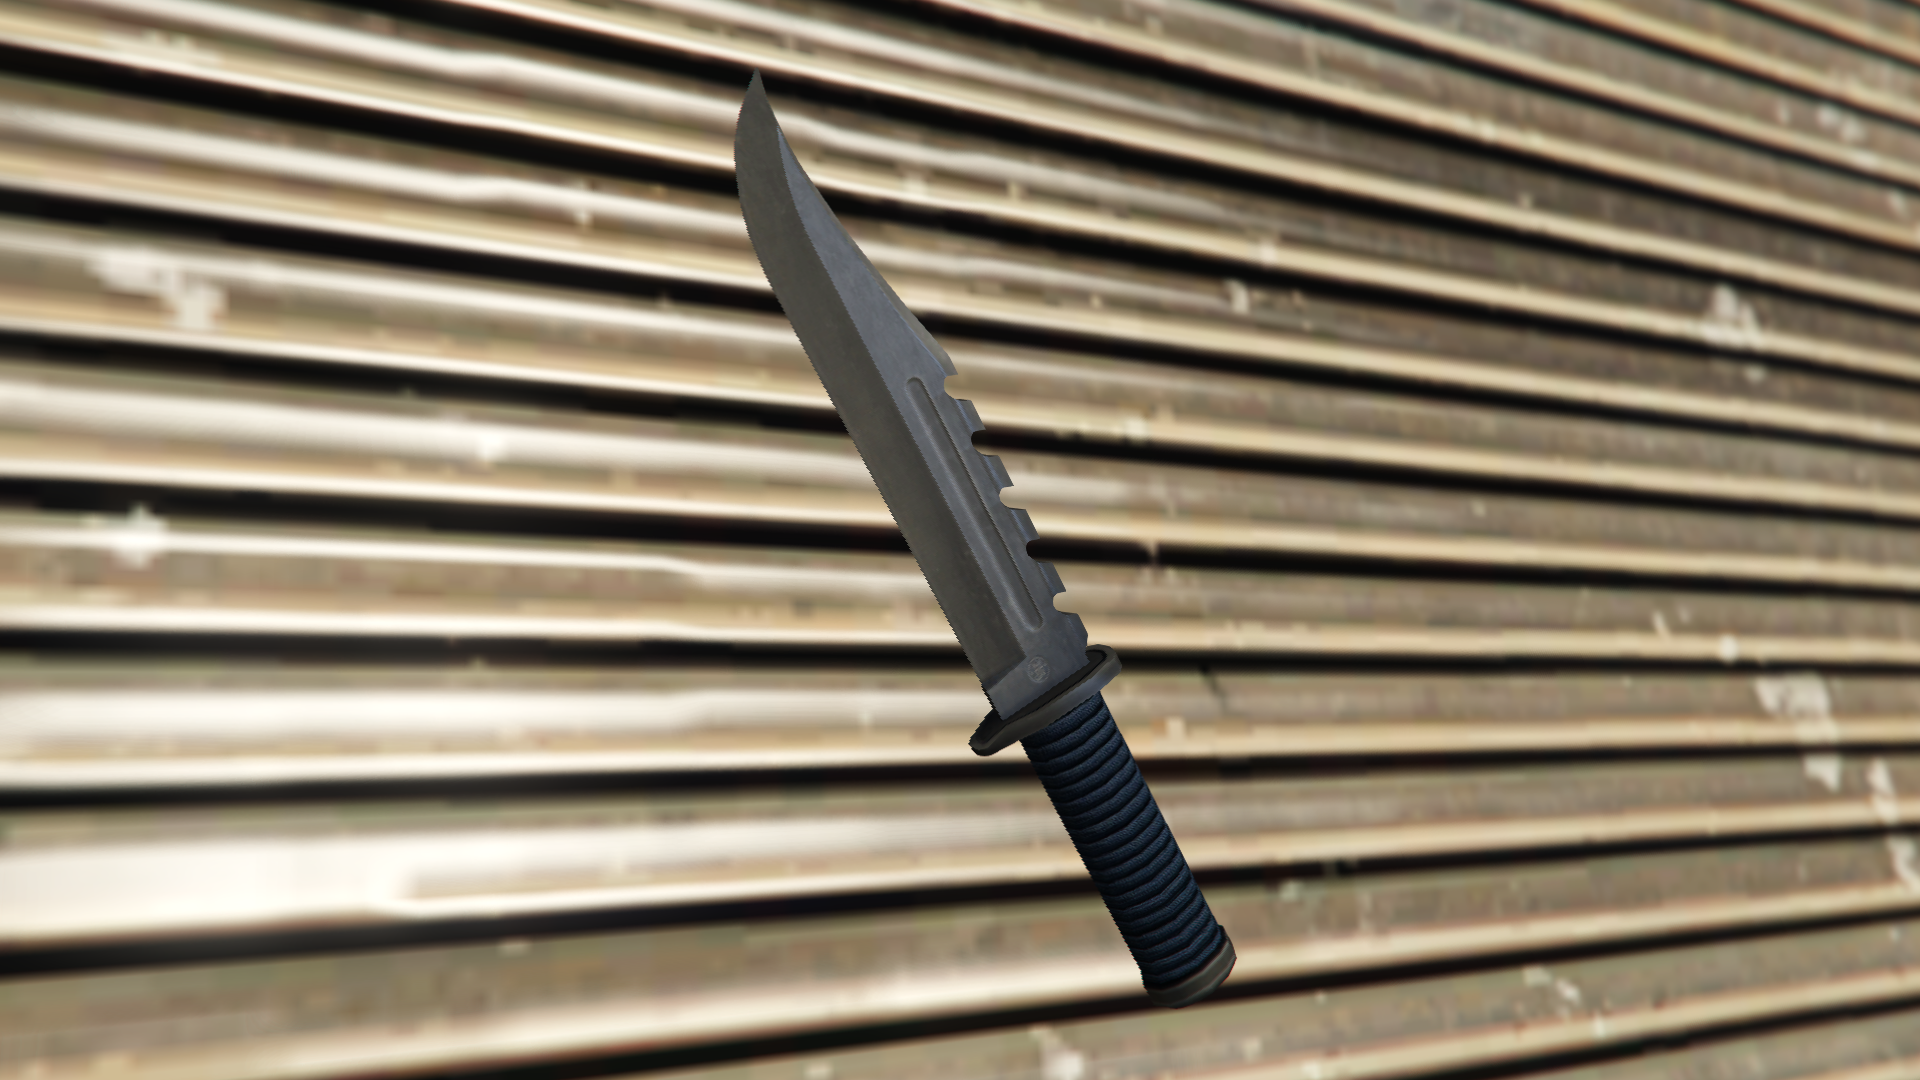 https://static.wikia.nocookie.net/gtawiki/images/a/a7/Knife-GTAV.png/revision/latest?cb=20221228141613